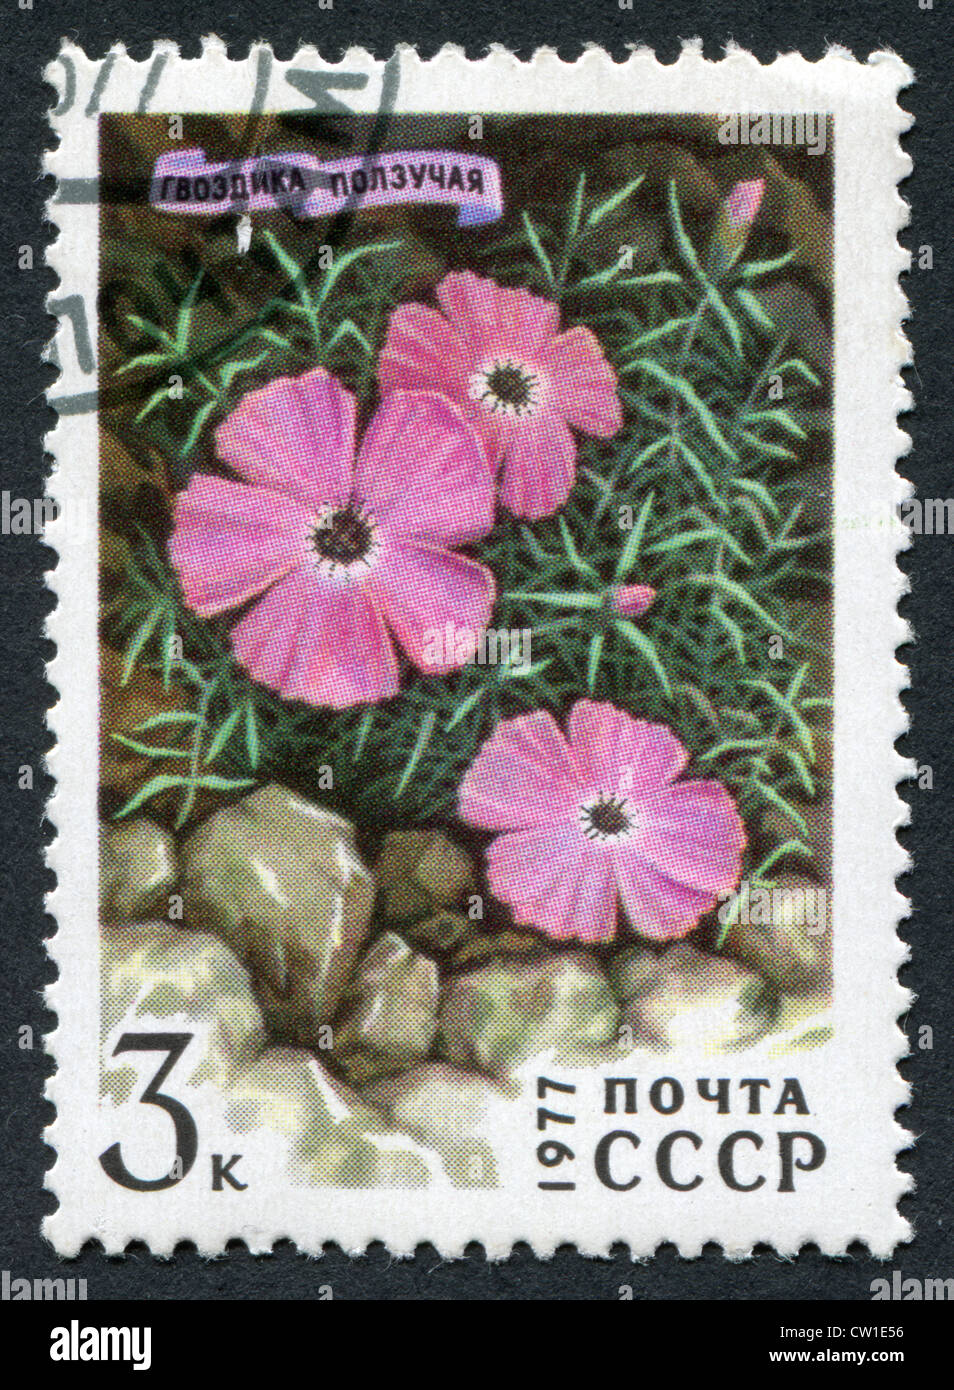 USSR - CIRCA 1977: A stamp printed in the USSR shows carnation, pink or sweet william - Dianthus repens, circa 1977 Stock Photo